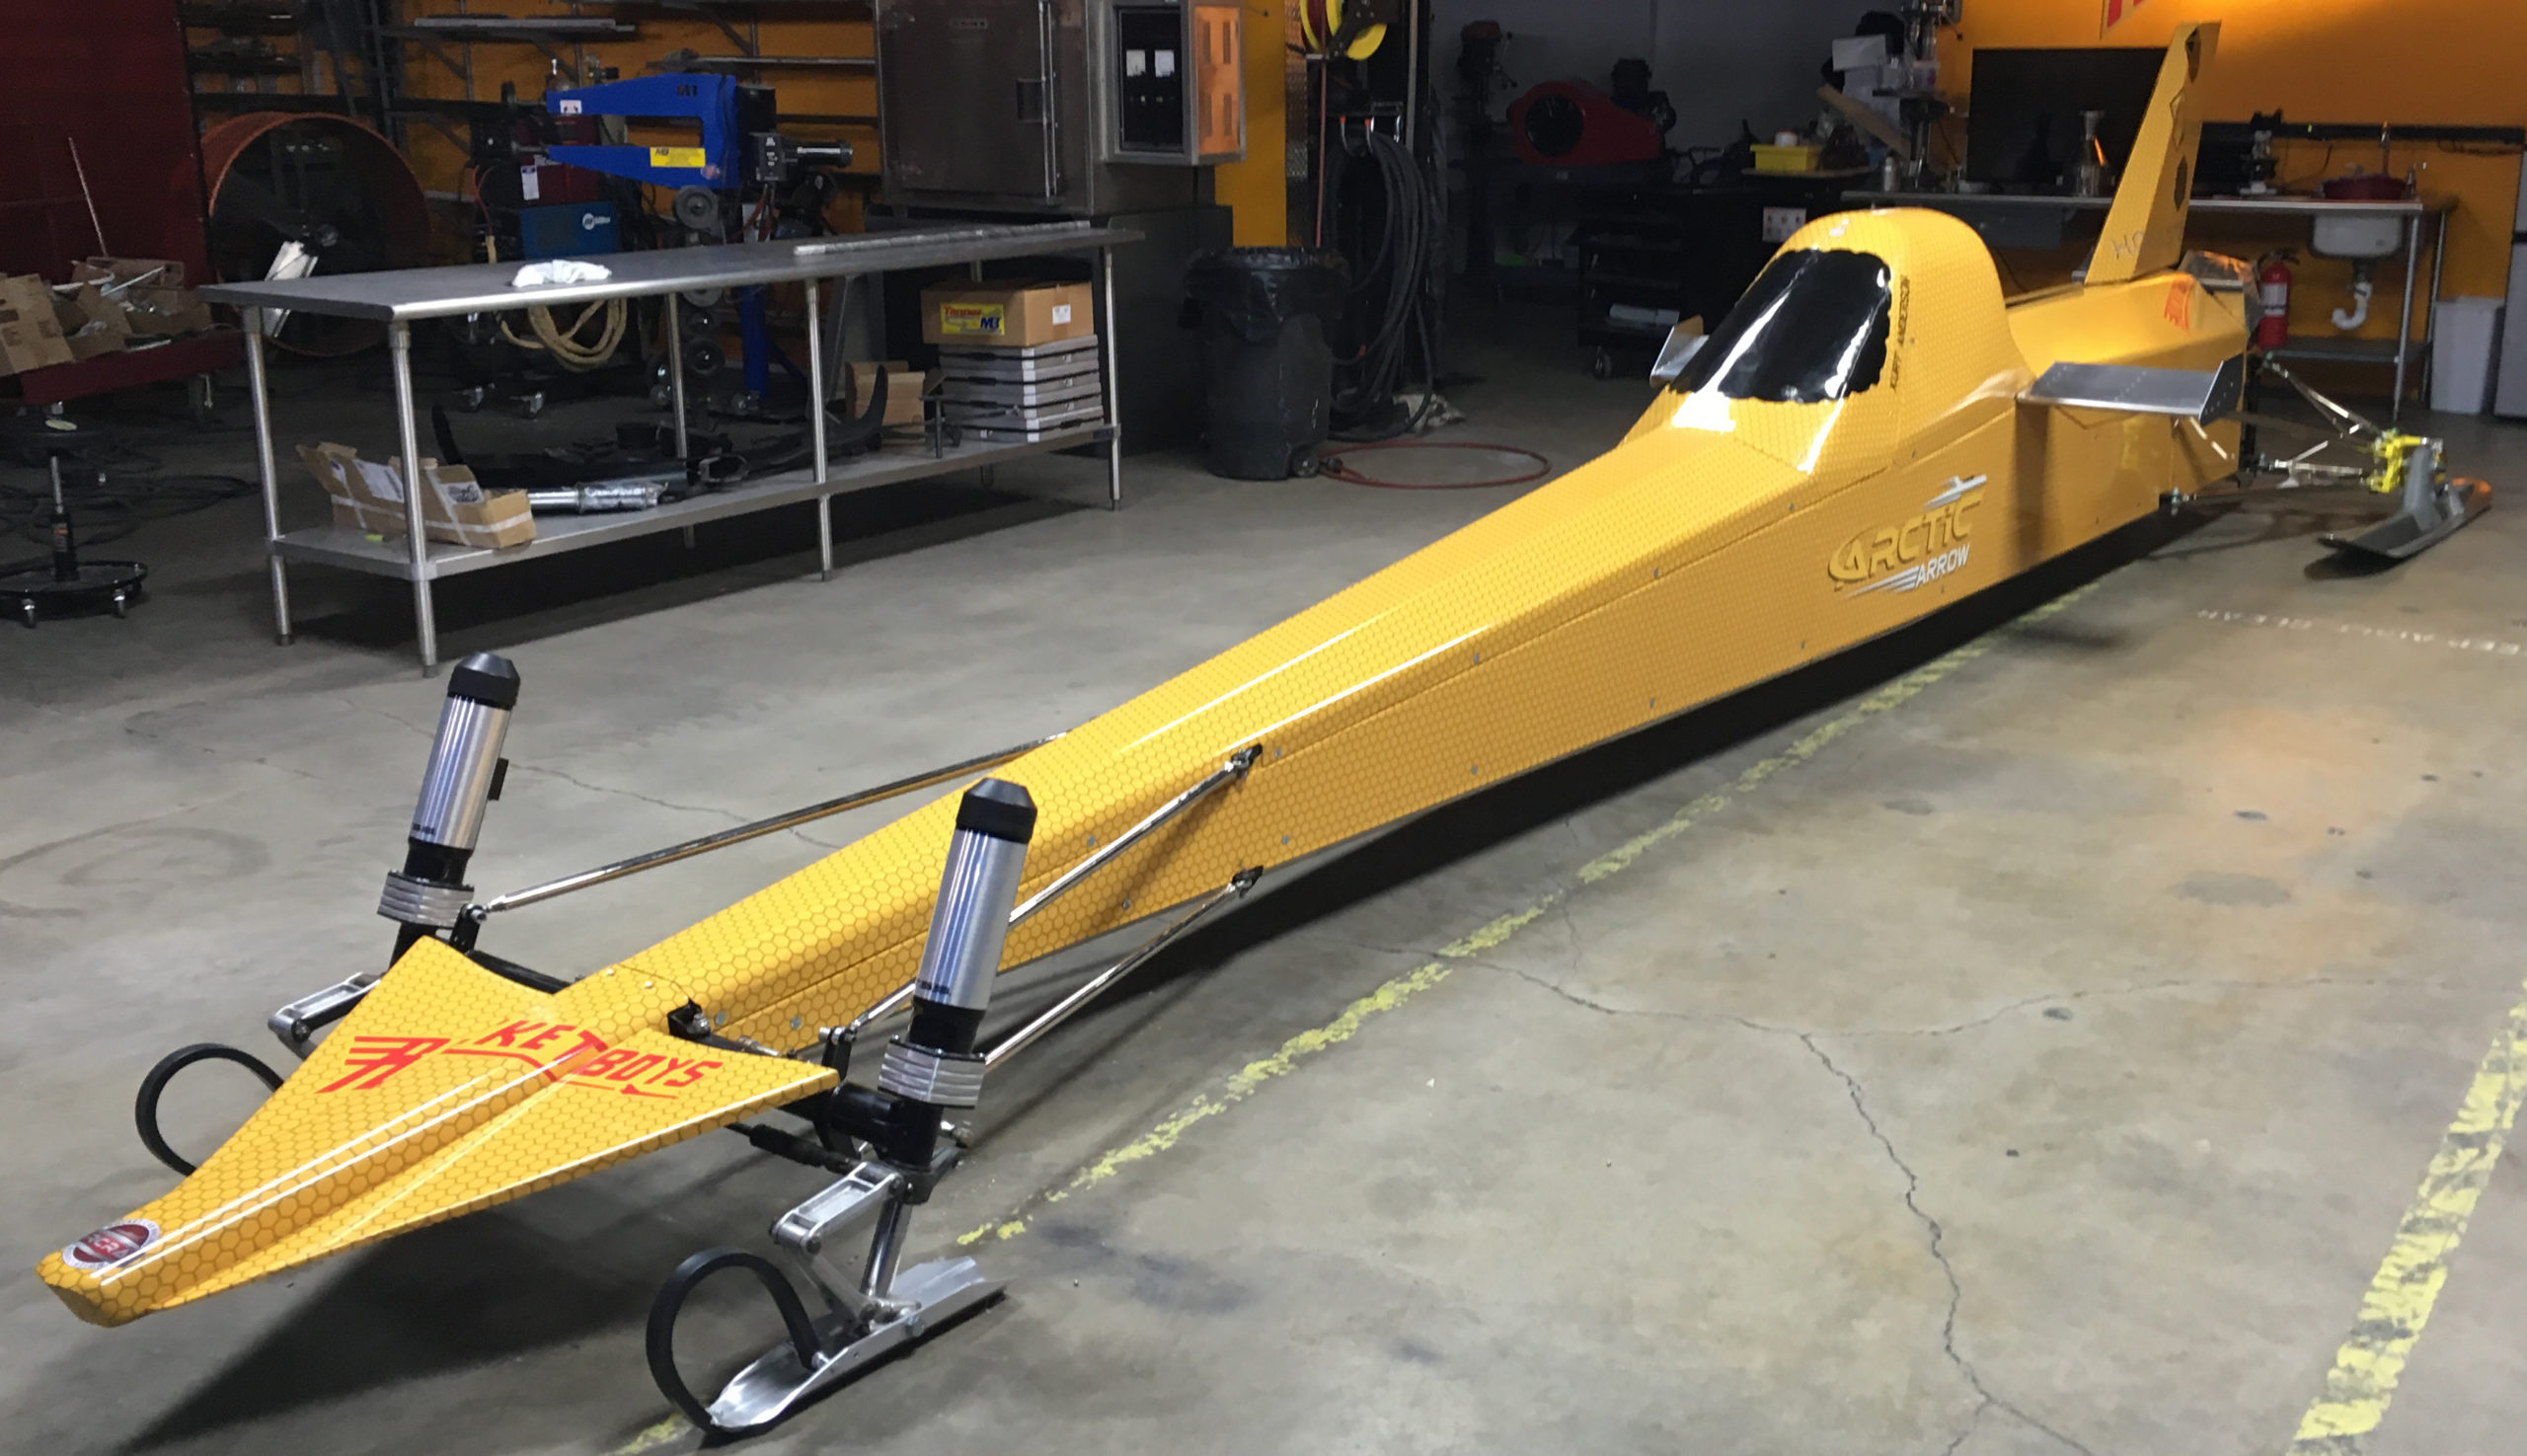 Safety Gear Saves Driver in 241-mph Ice Racer Crash | THE SHOP